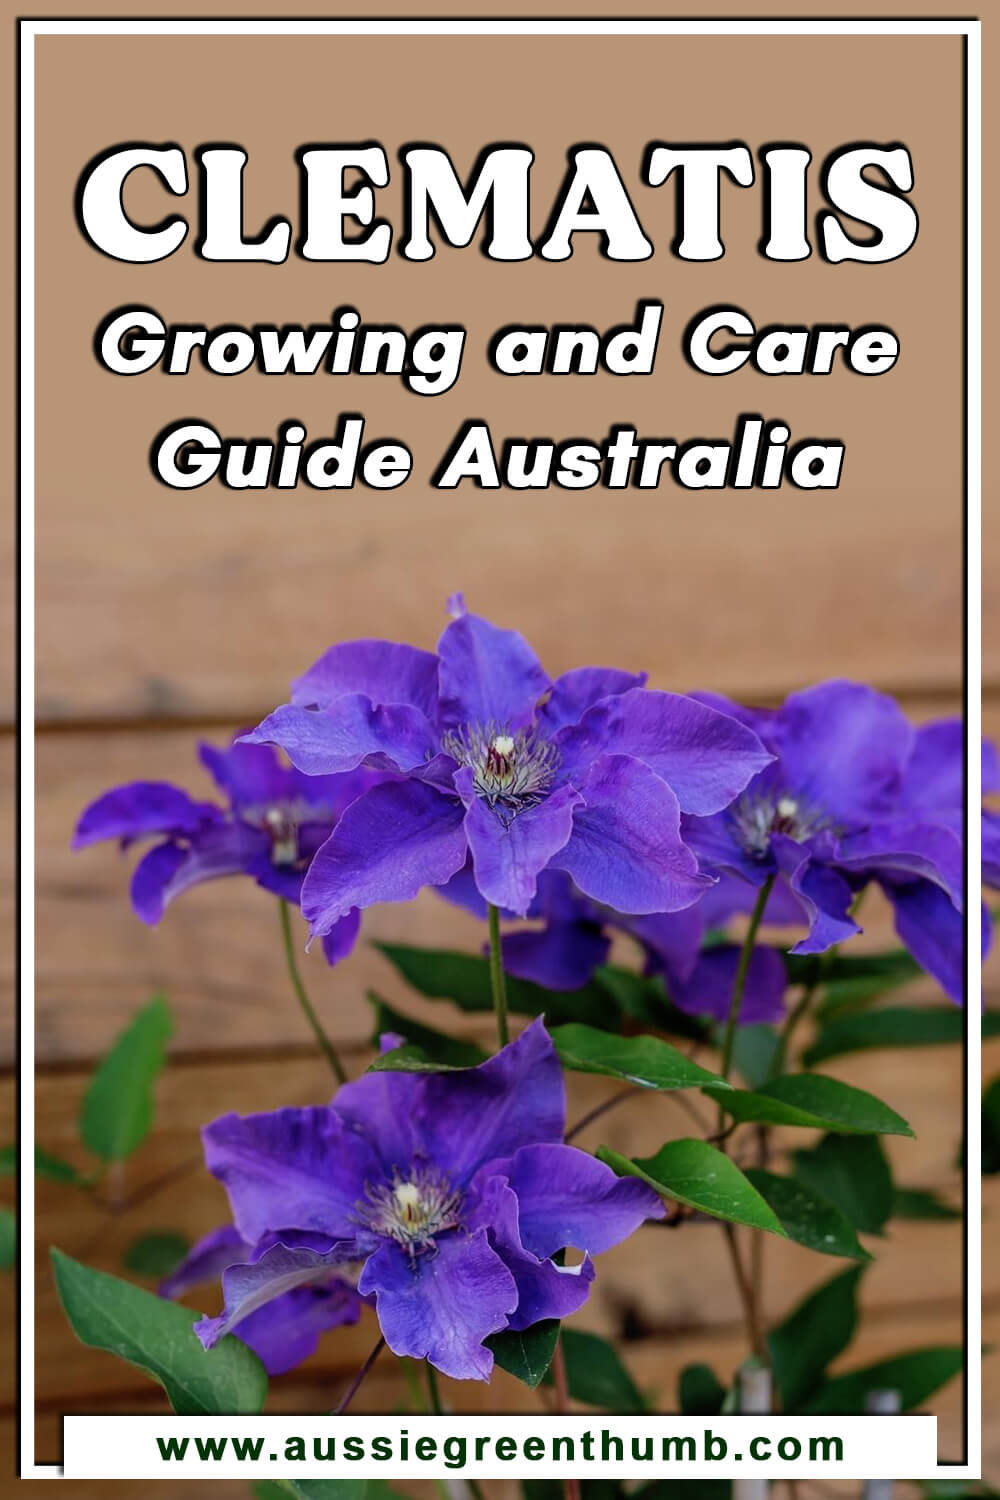 Clematis Growing and Care Guide Australia